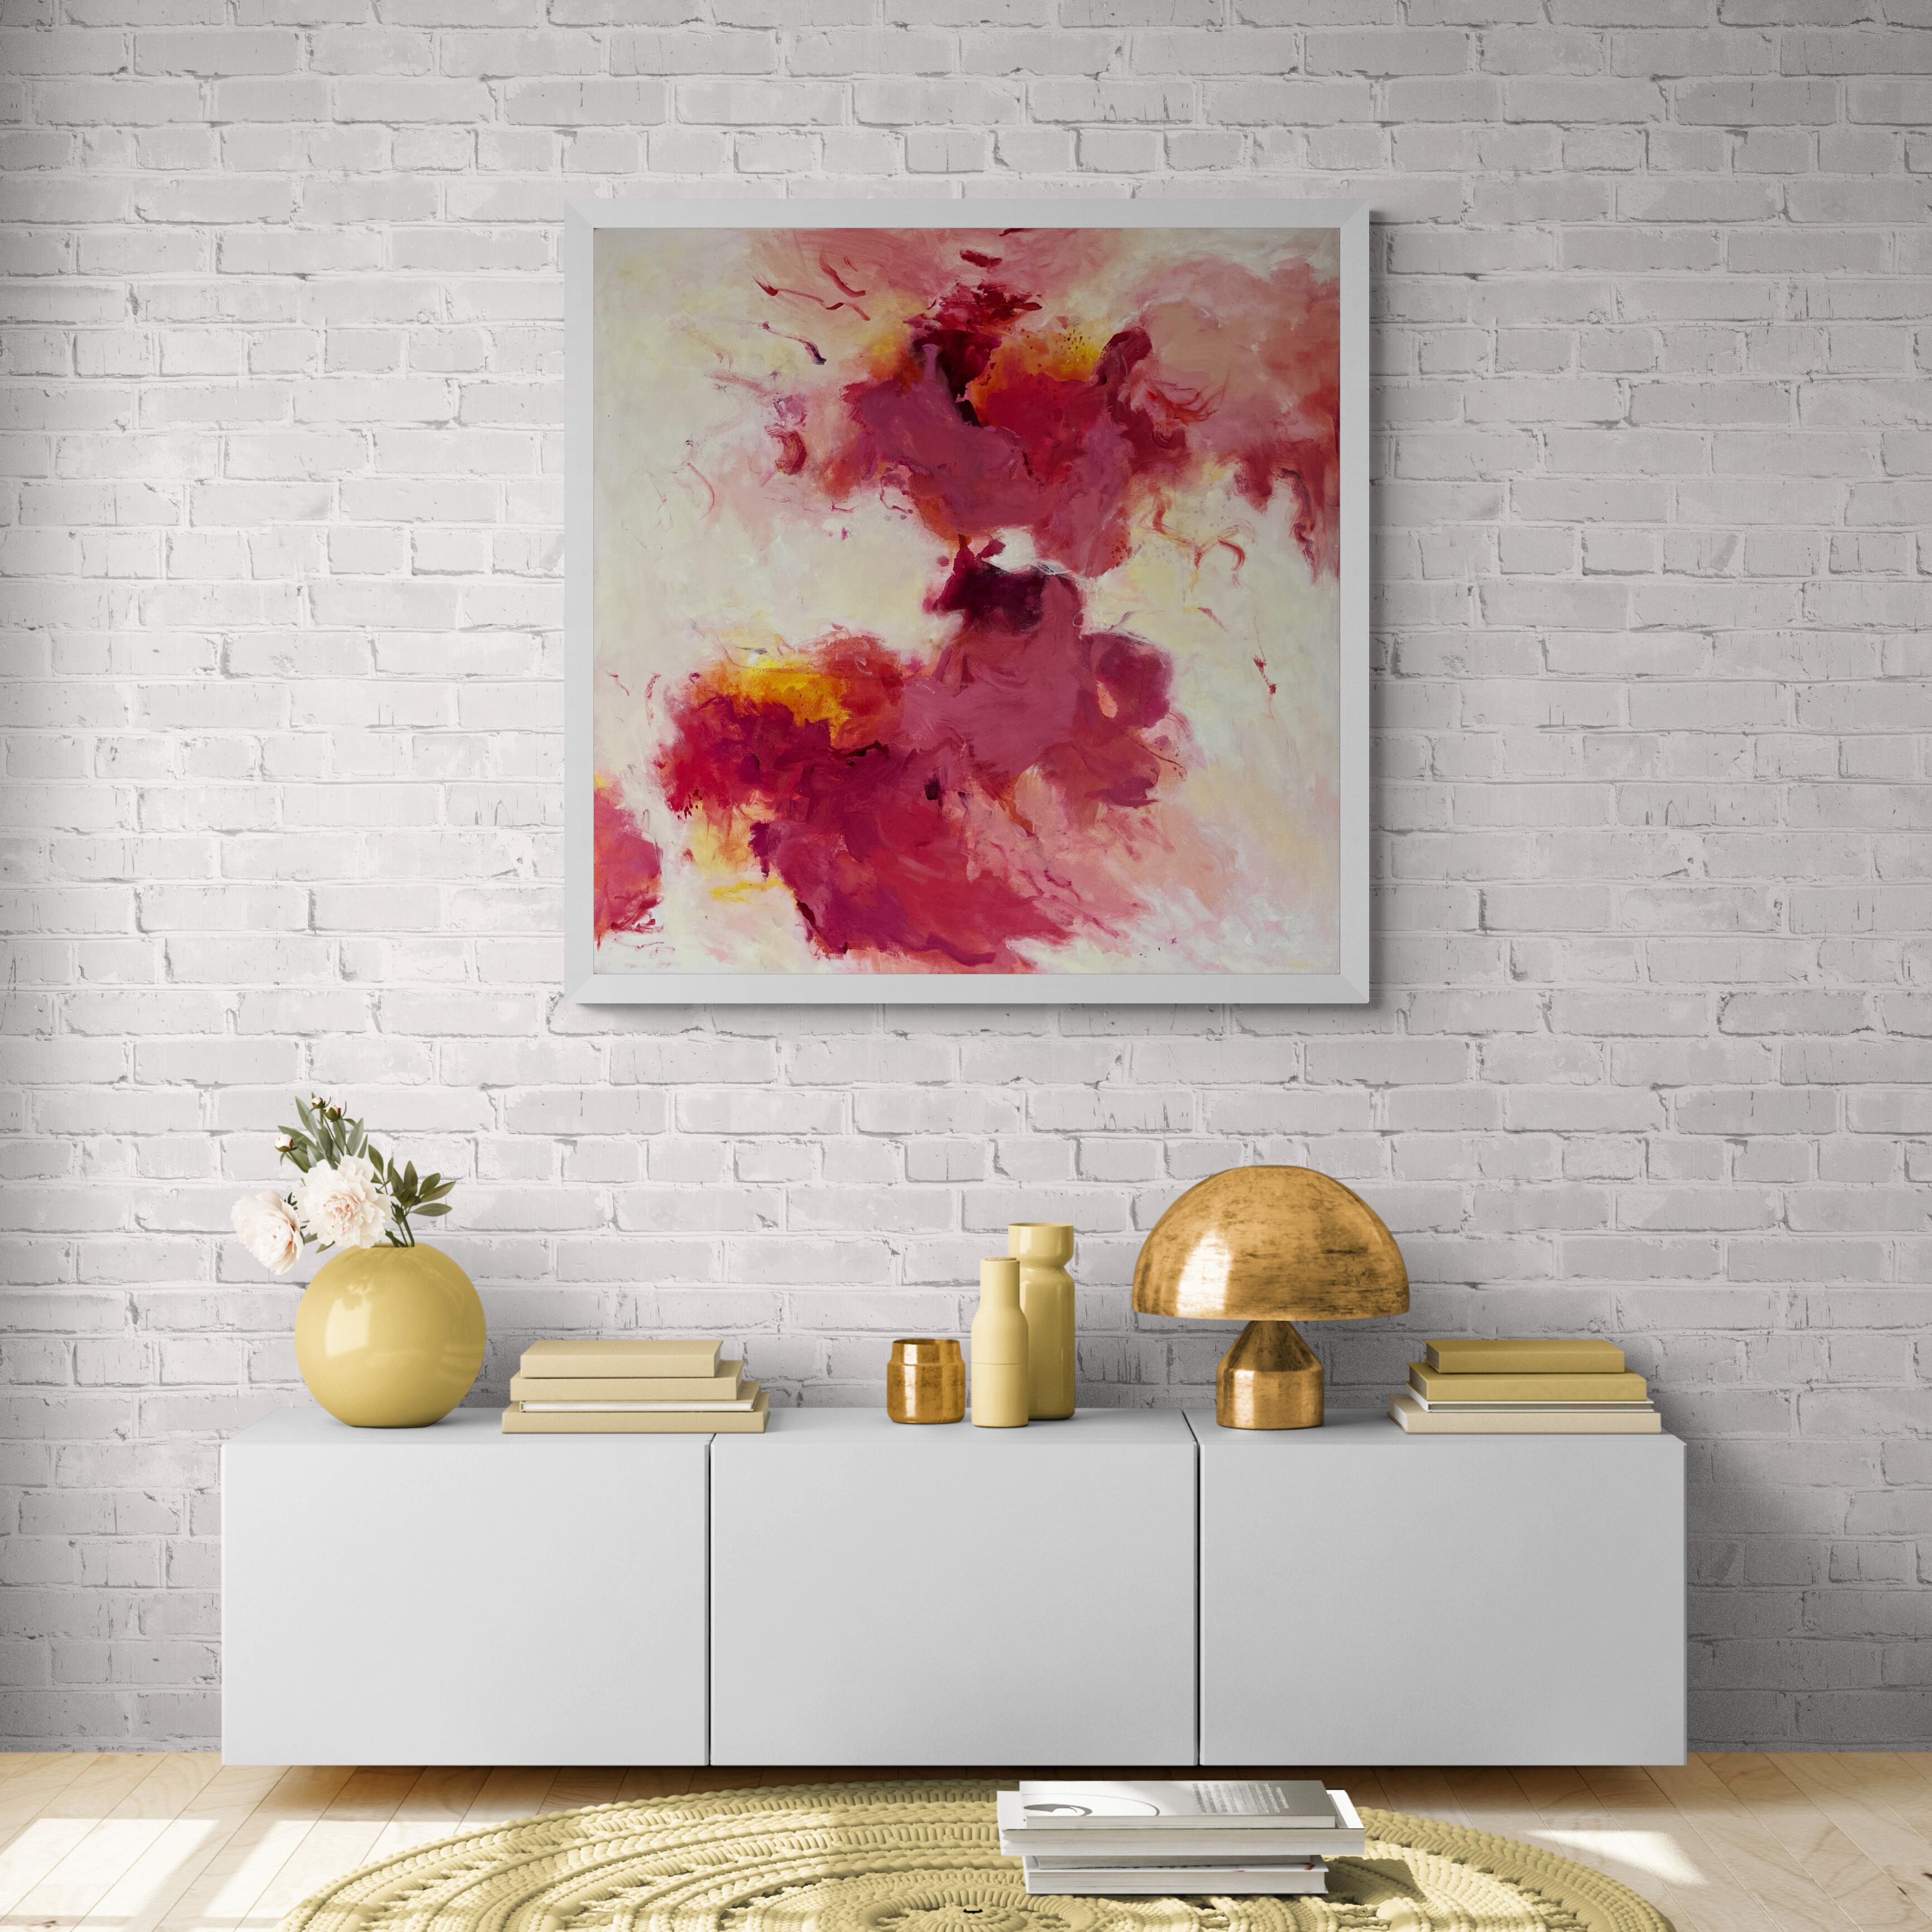 Love Pact (Abstract, Expressionism, Warm, Sensual, Clouds, Flowing, 25% OFF) - Painting by Katherine Bello